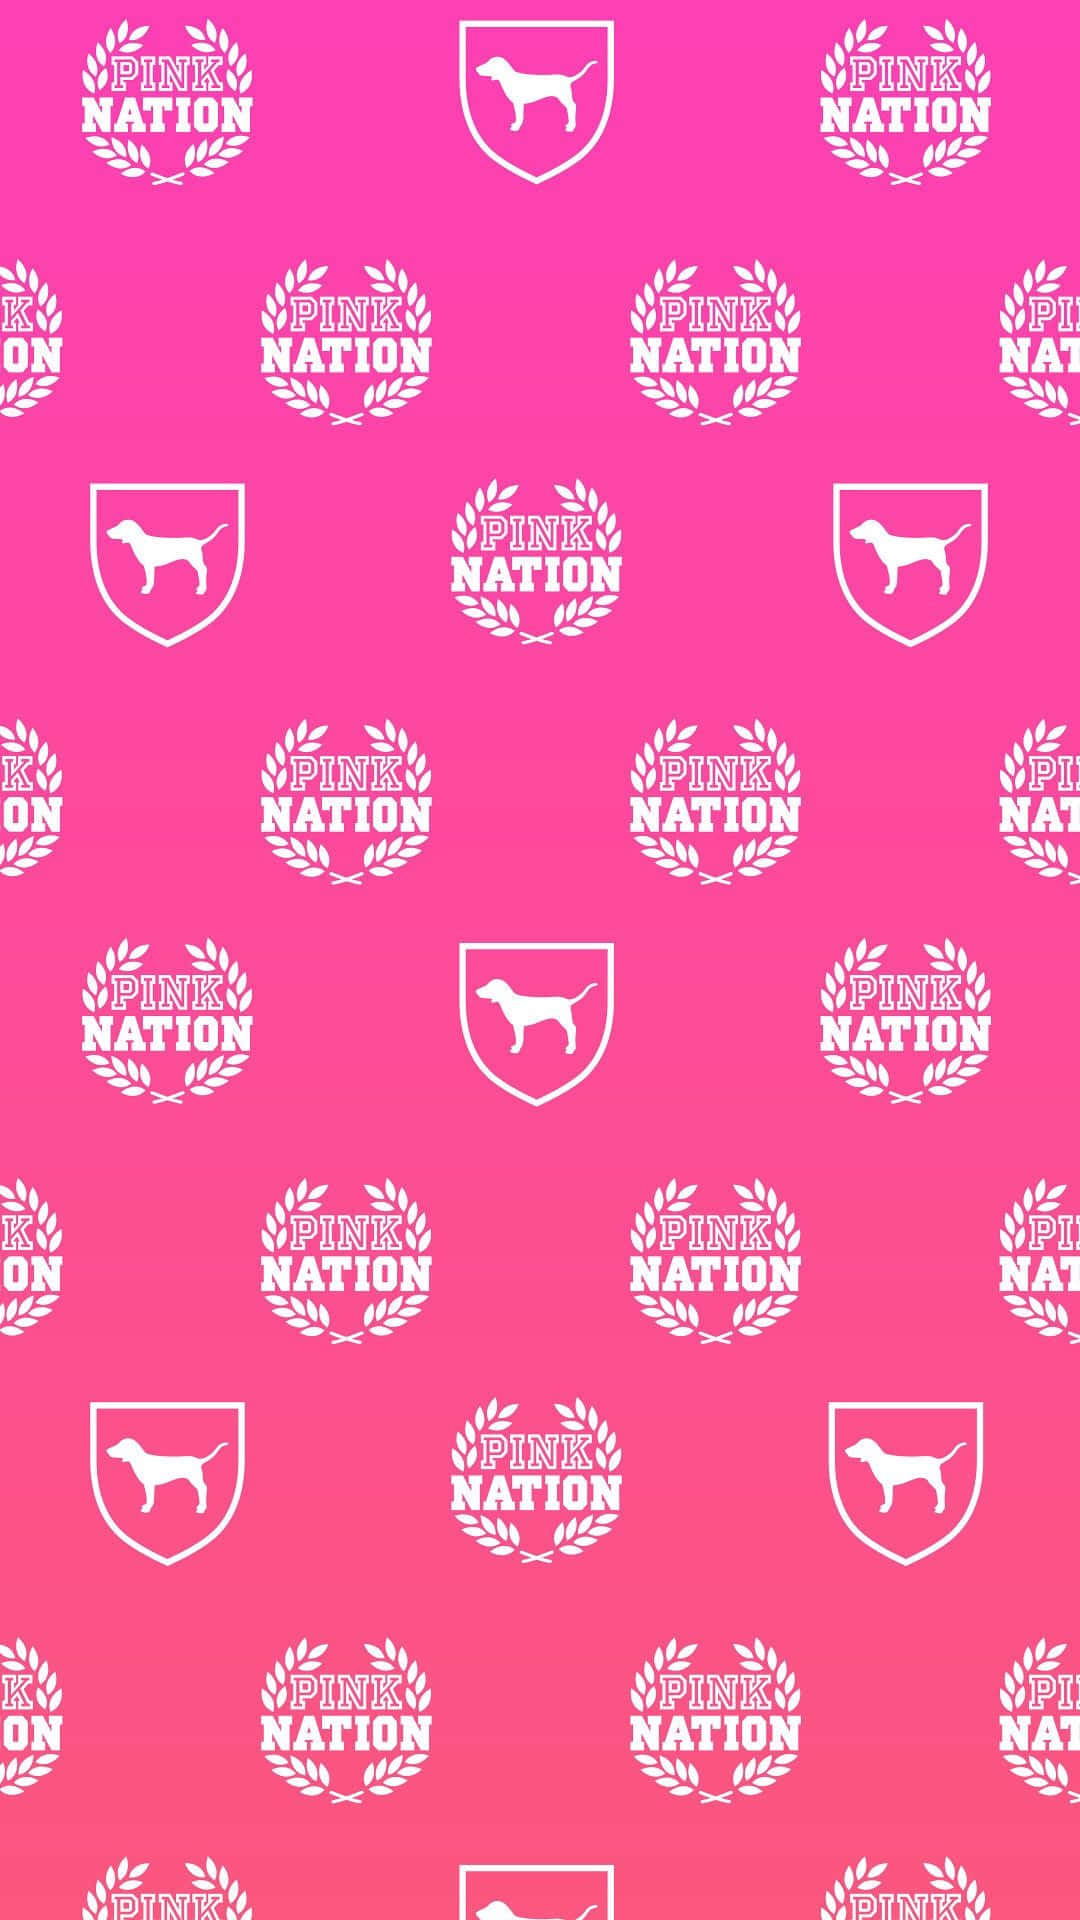 A Pink Background With White Dog Logos Wallpaper